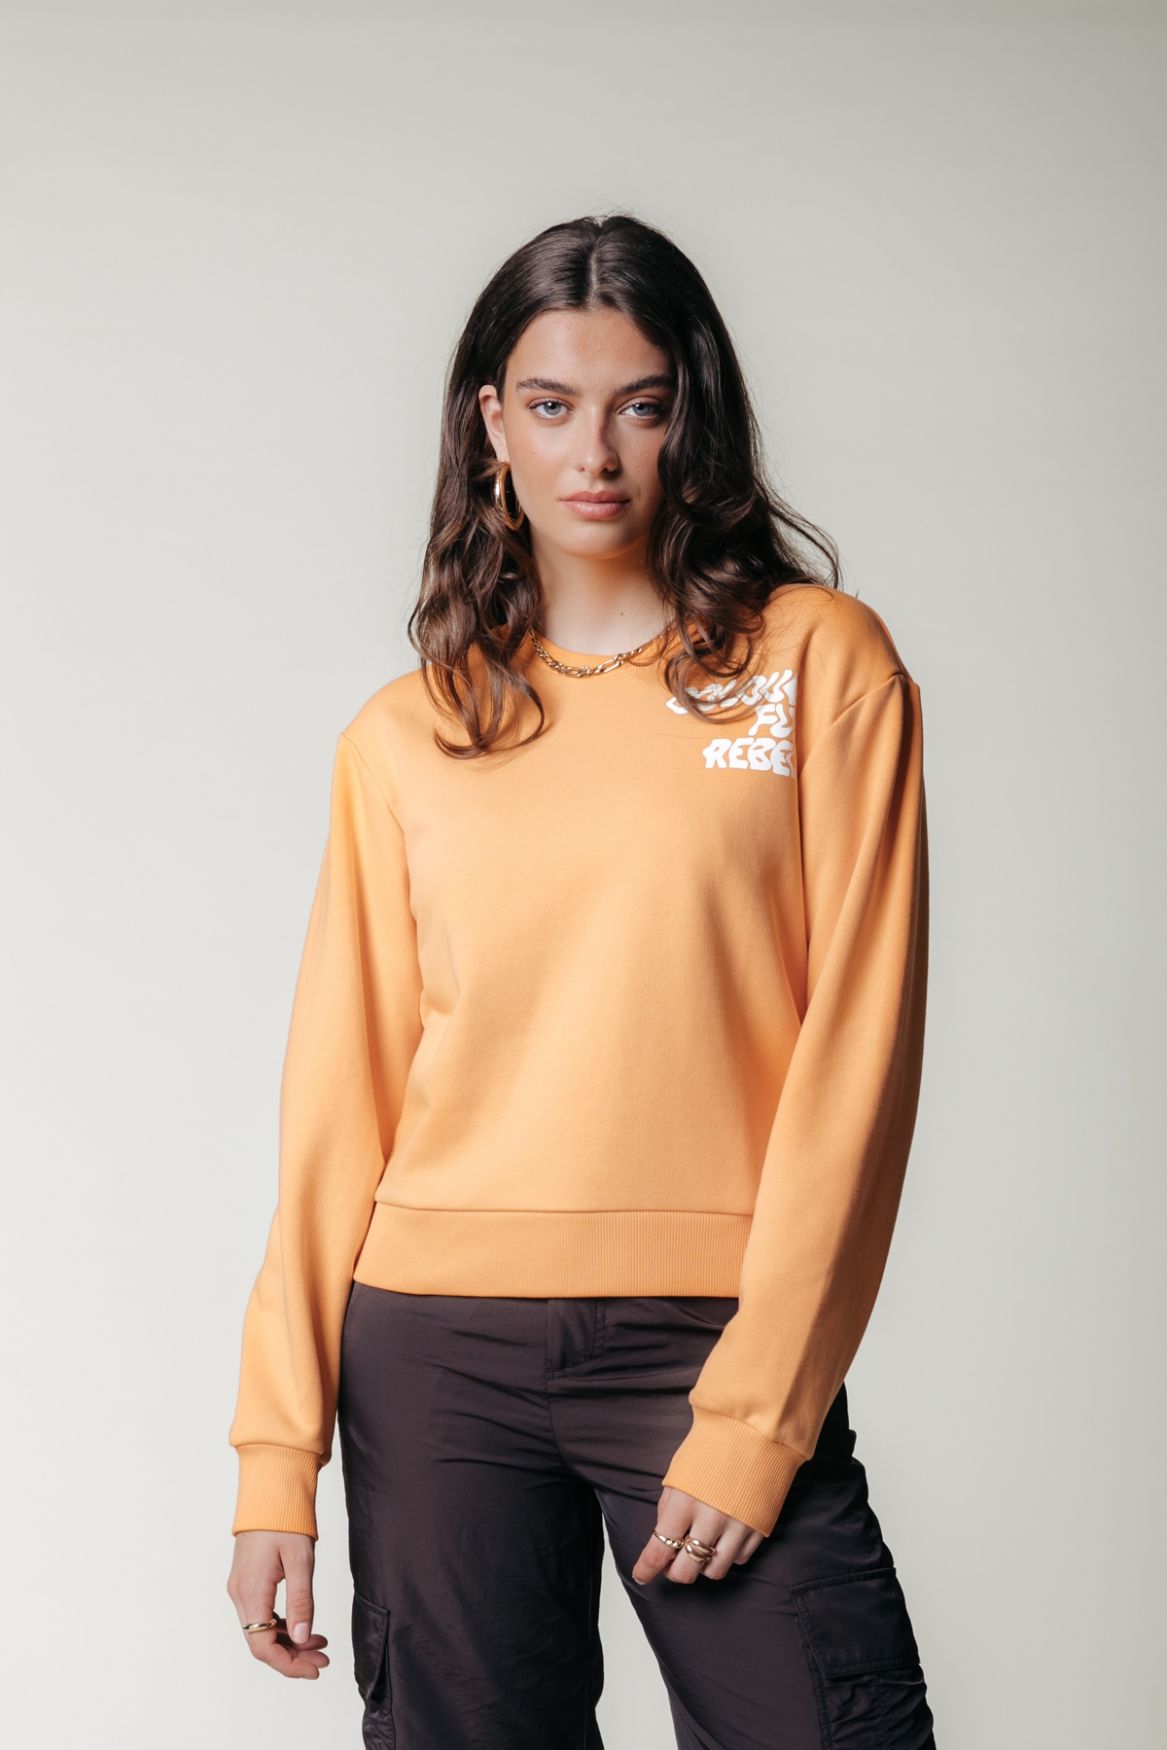 Colourful Rebel Logo Wave Relaxed Sweat 725 tangerine 2900145586026